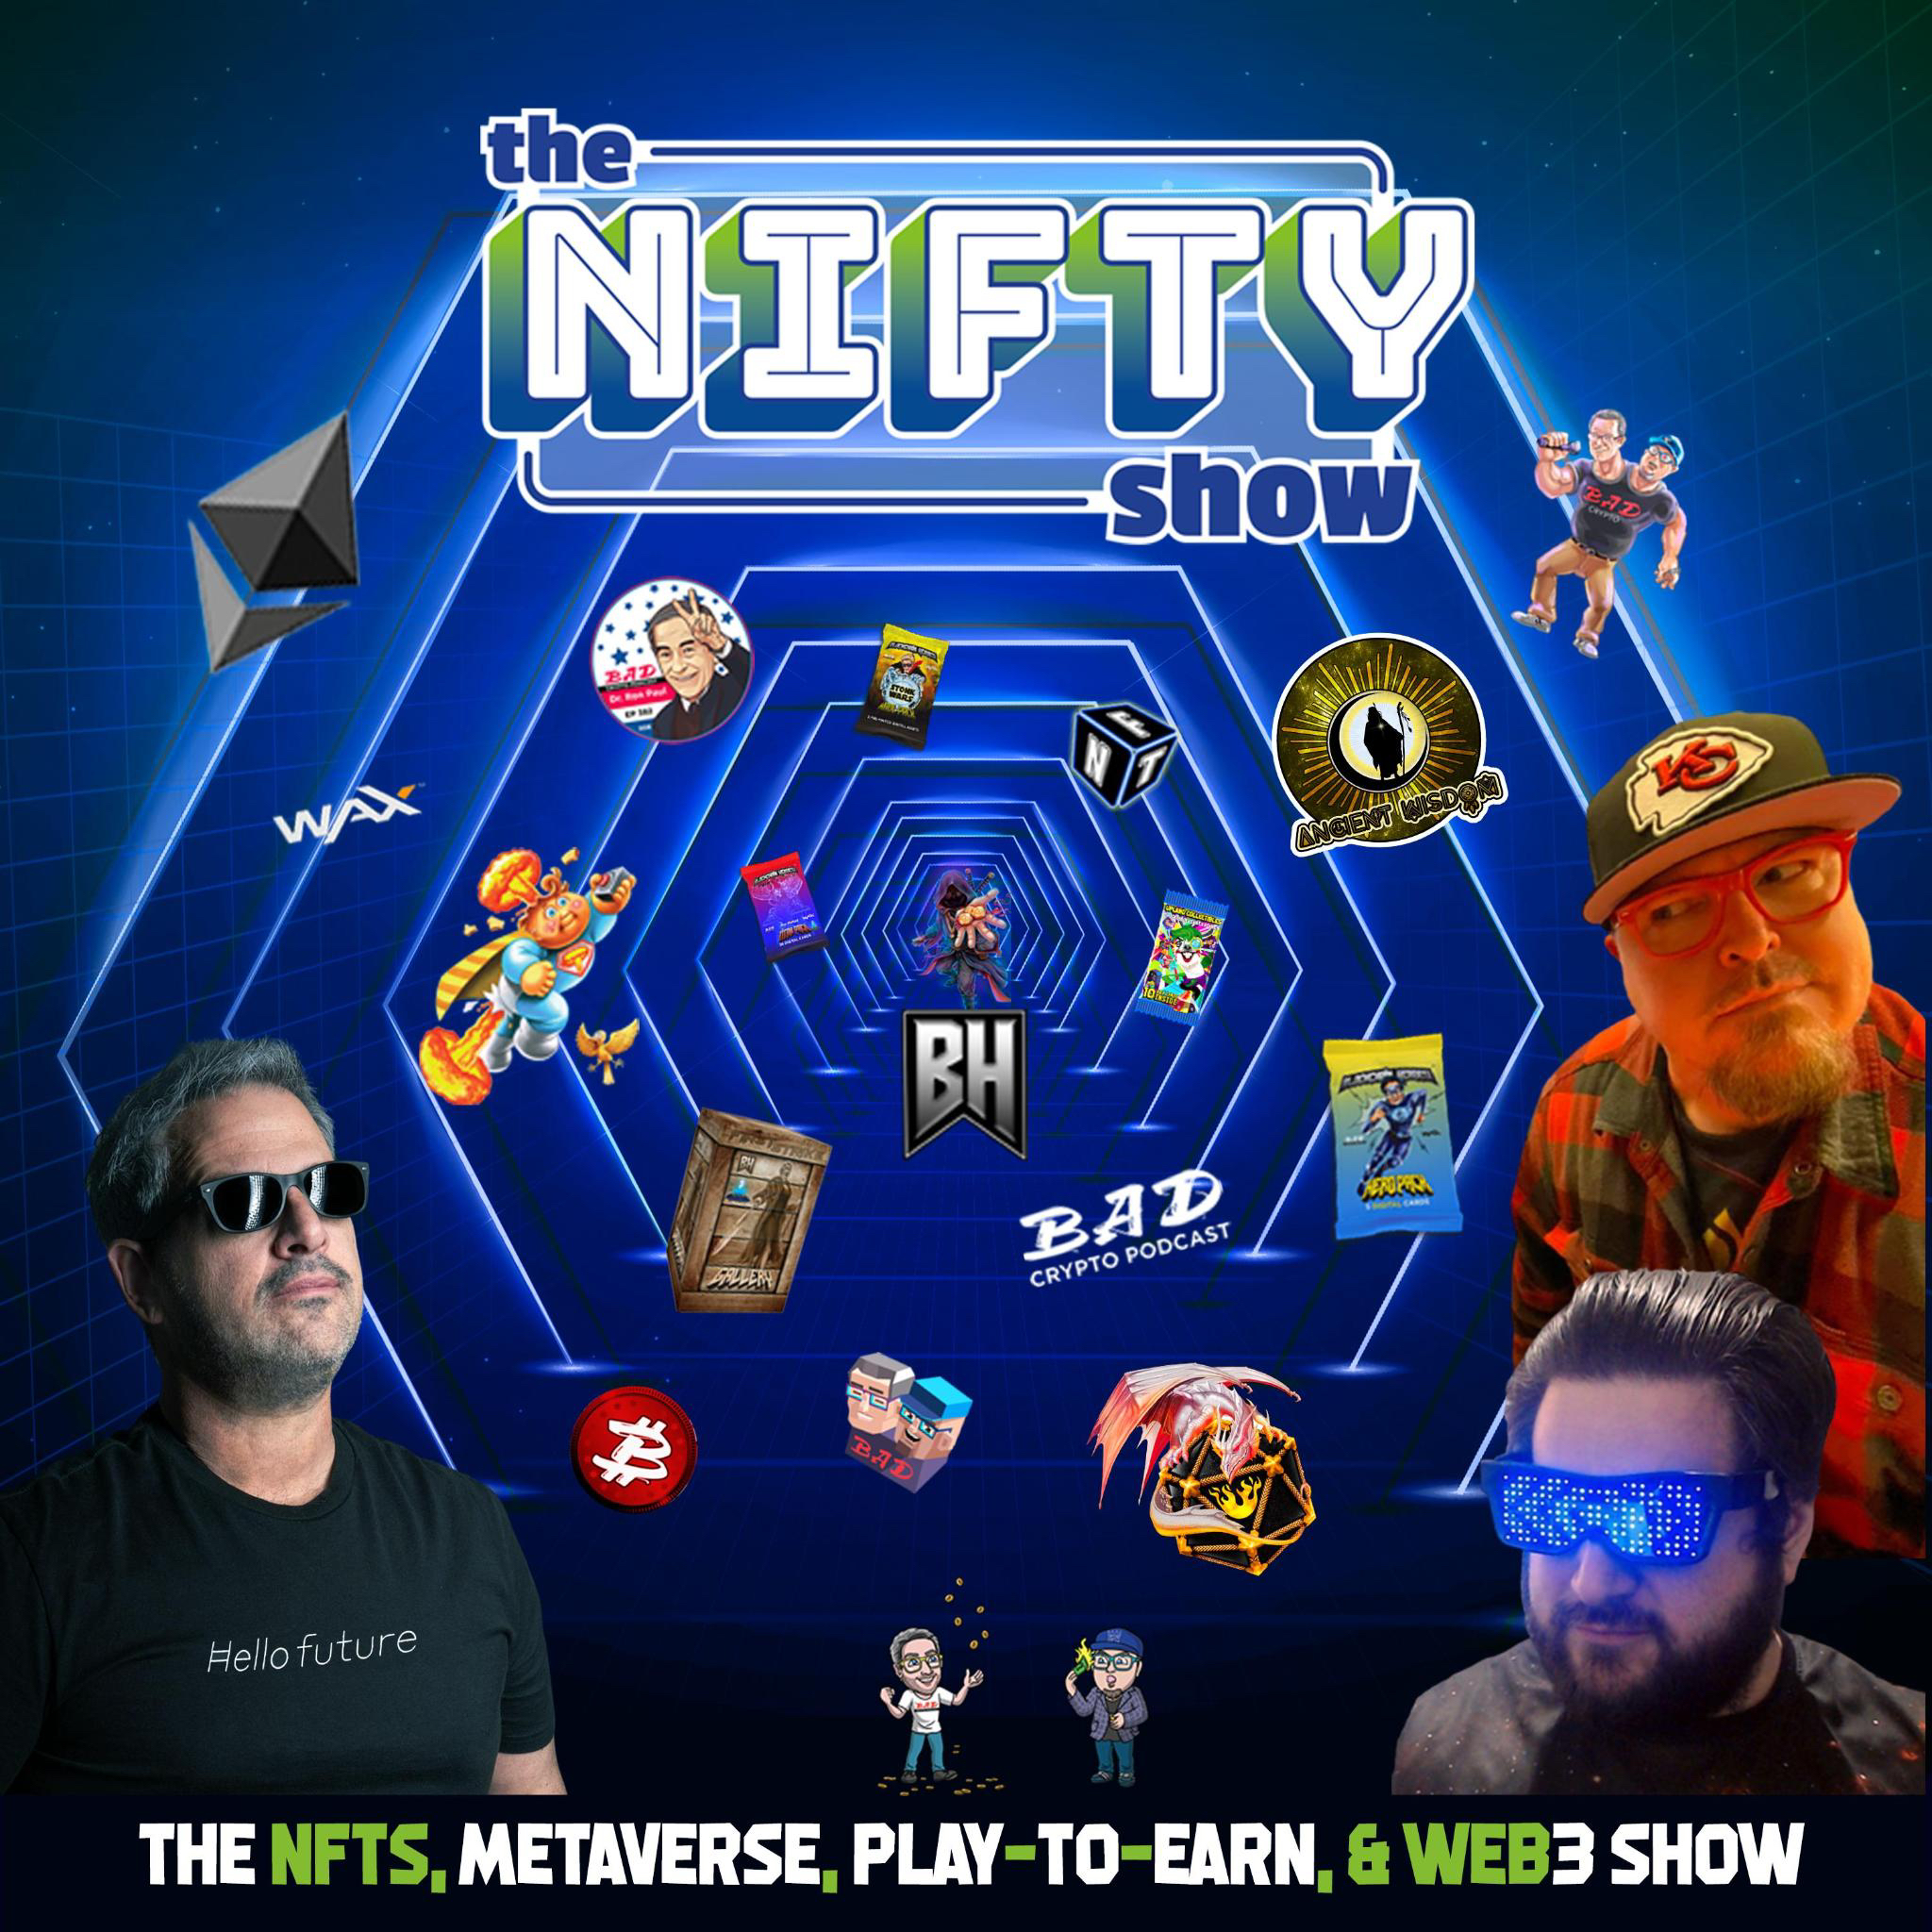 Snowden Sells NFT for $5.5m, Animoca sells $9m in 3 days. NFTs 🚀 Nifty Show 49: Nifty News